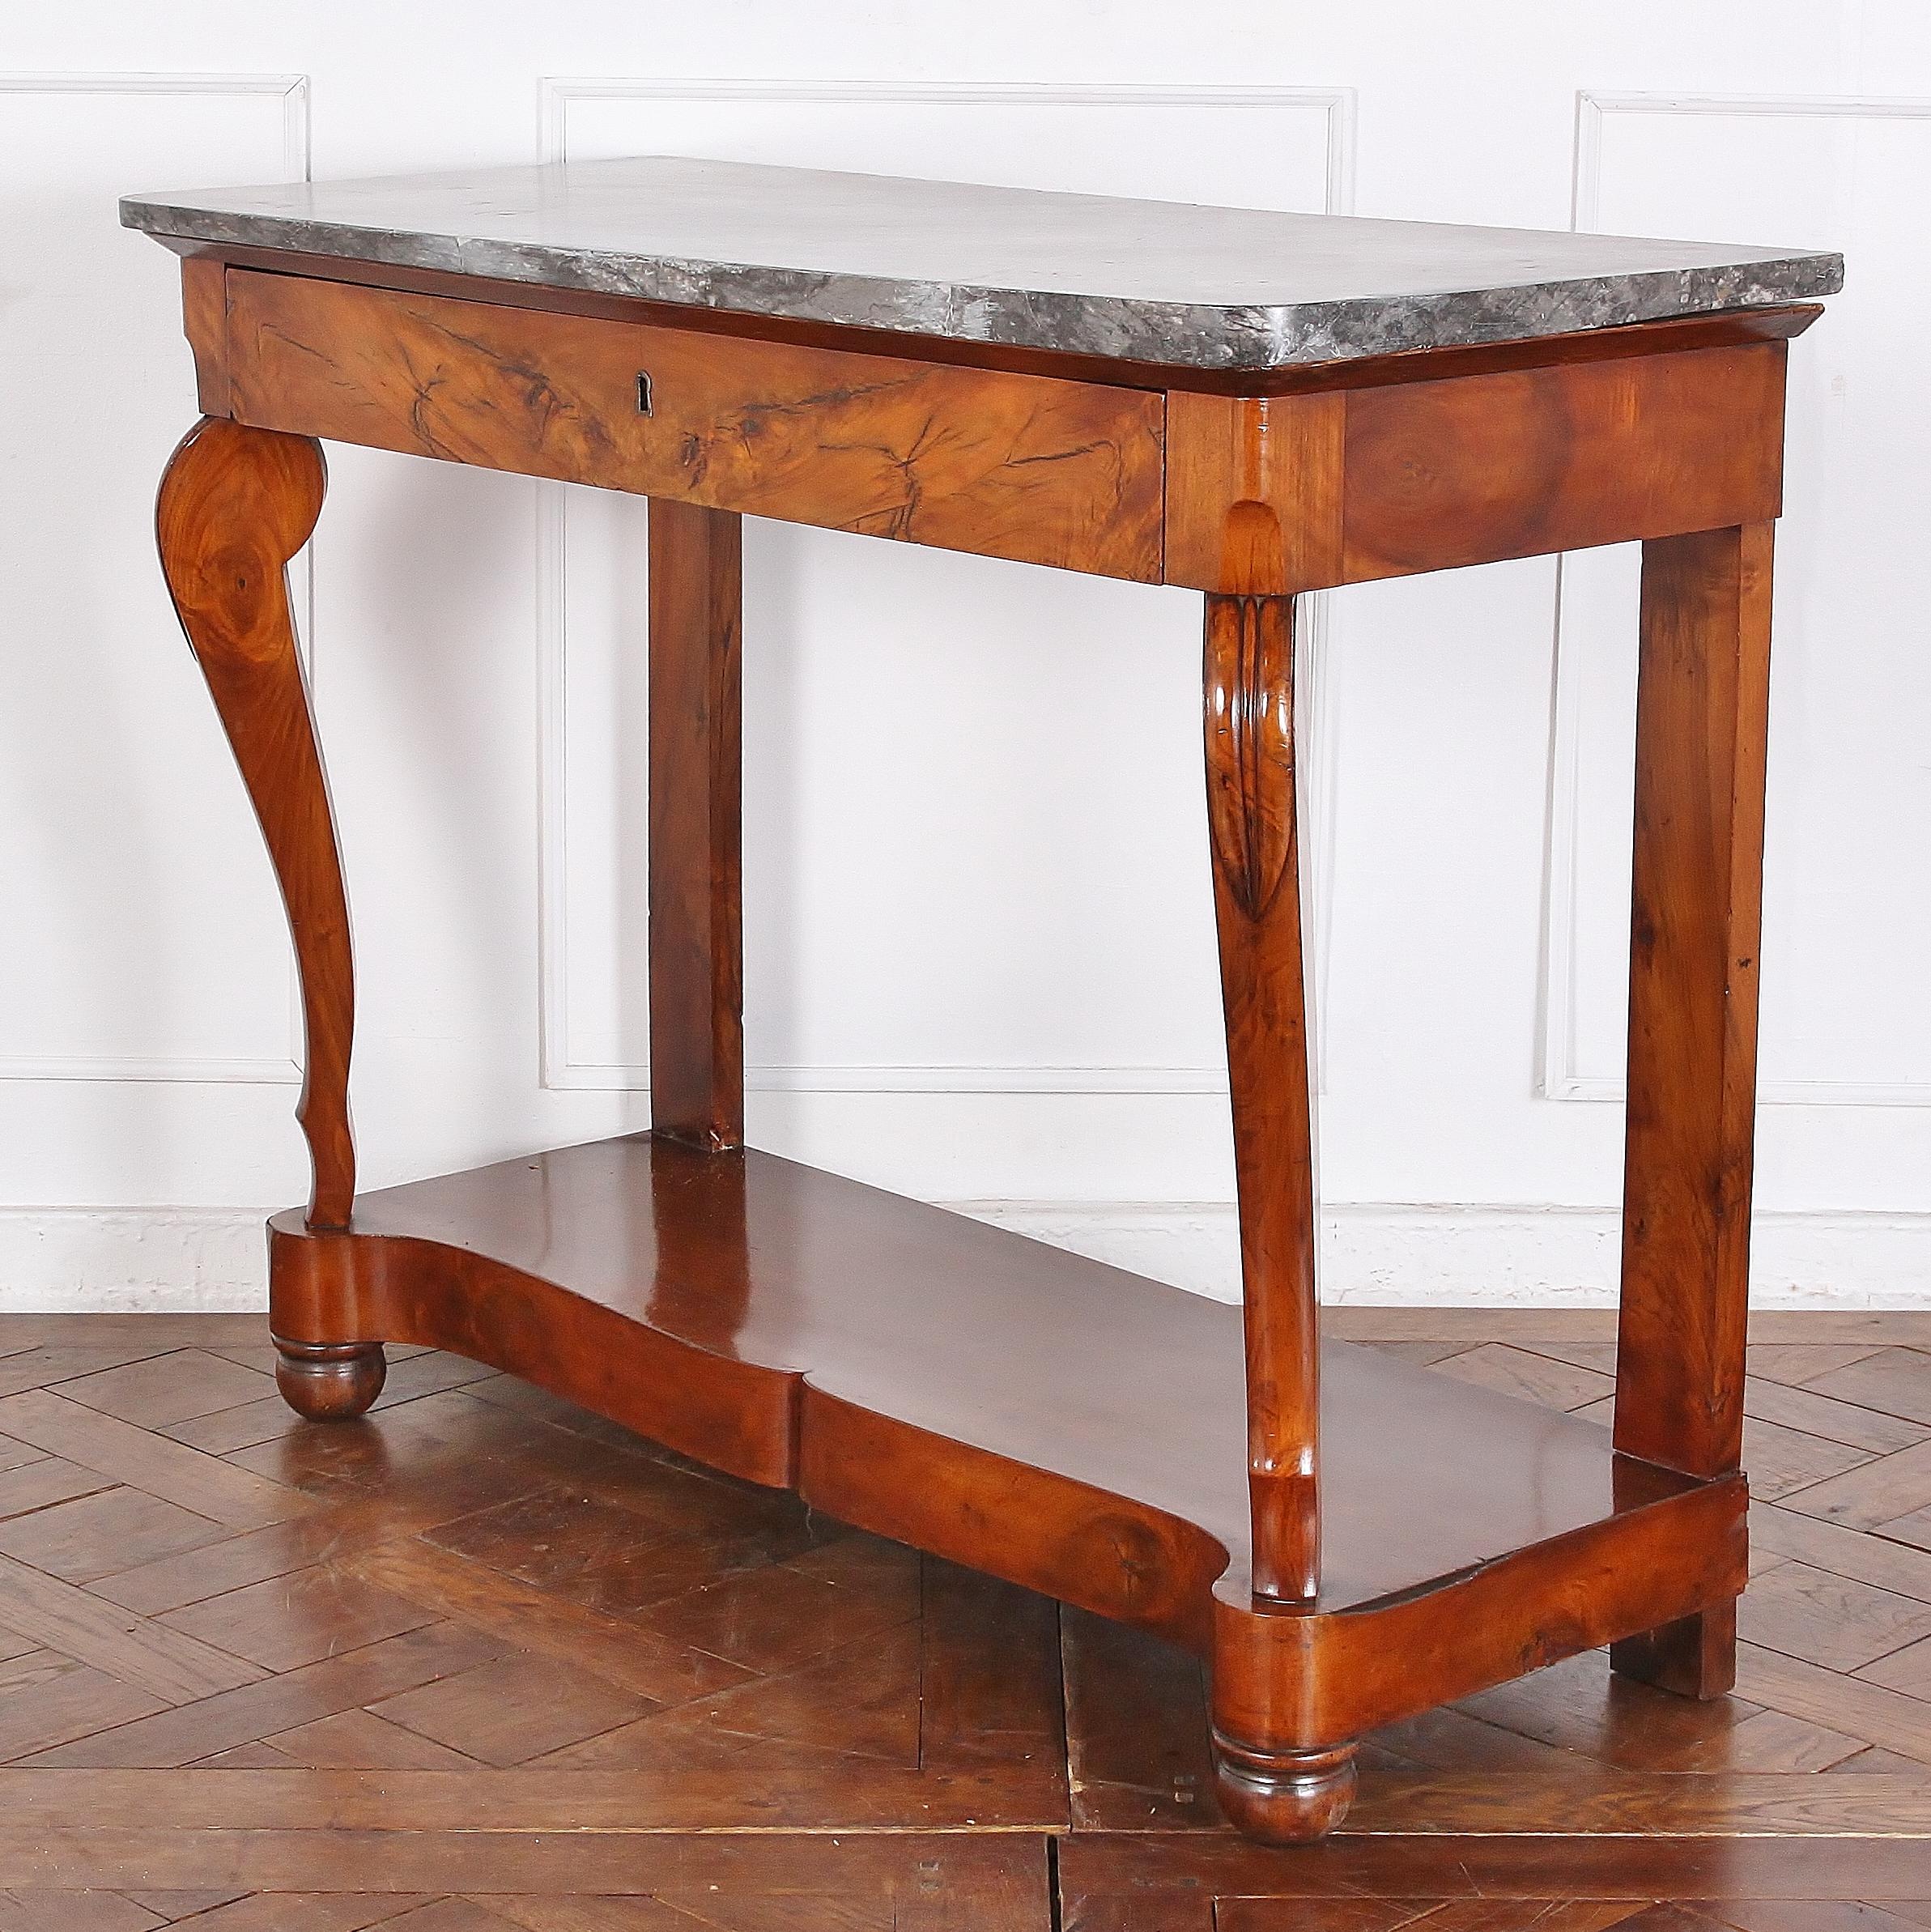 19th century French Empire walnut and marble top console having a single drawer fitted below the marble, the top raised on scroll supports and a simple plinth base, circa 1840.